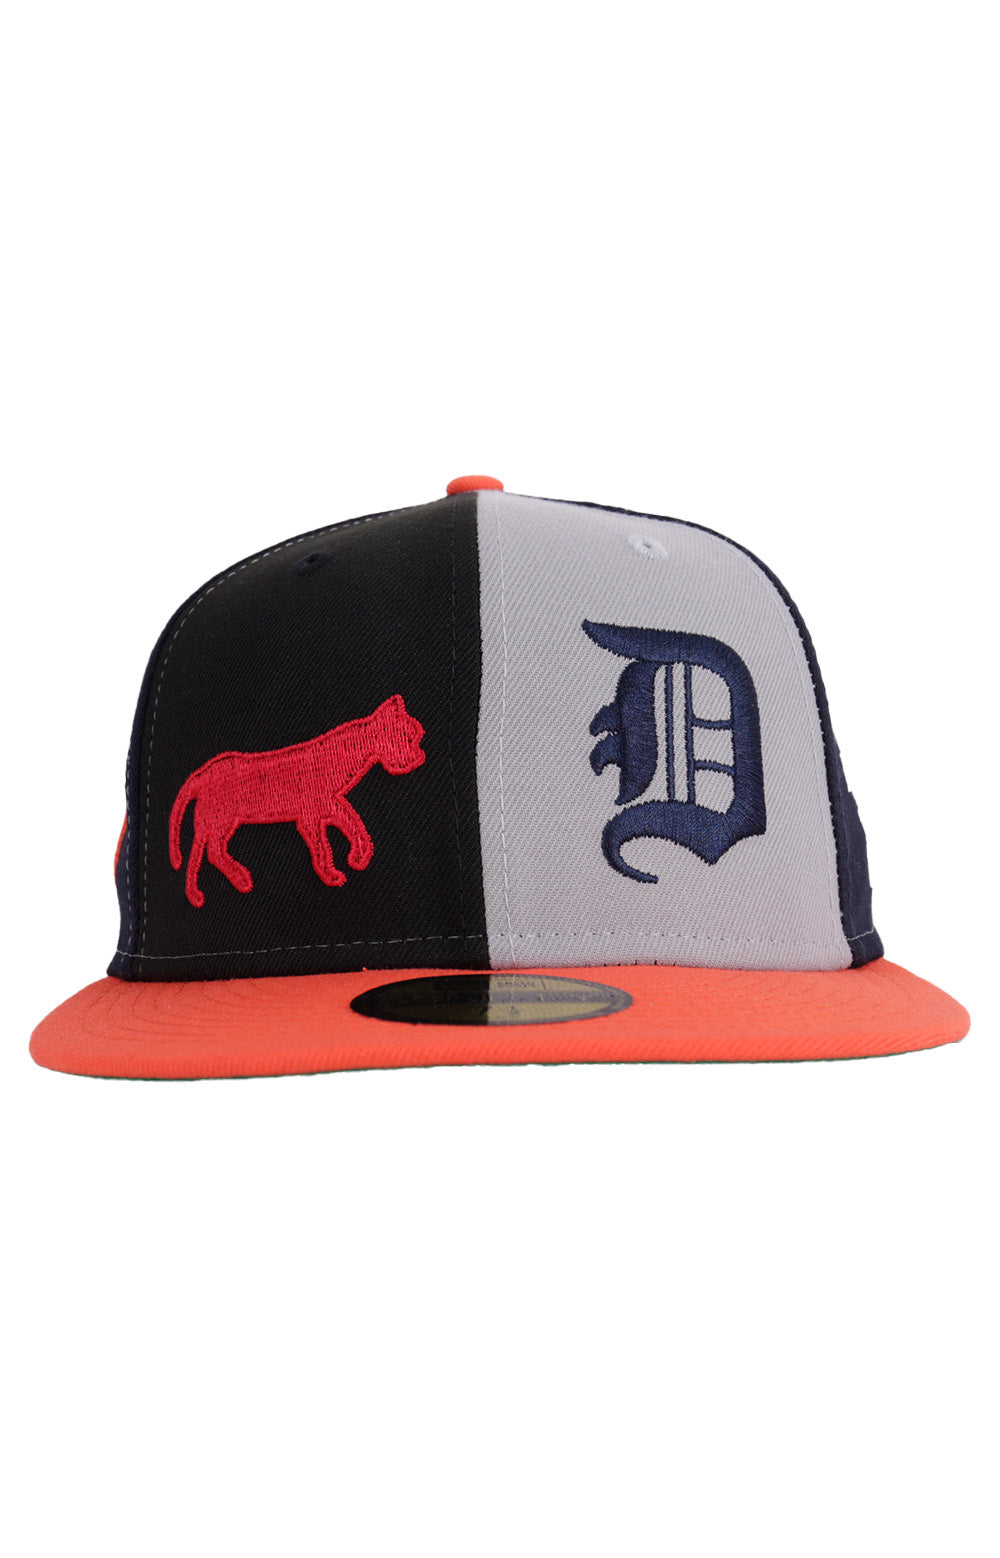 Detroit Tigers and U of M 59FIFTY Fitted Cap - Vintage Detroit